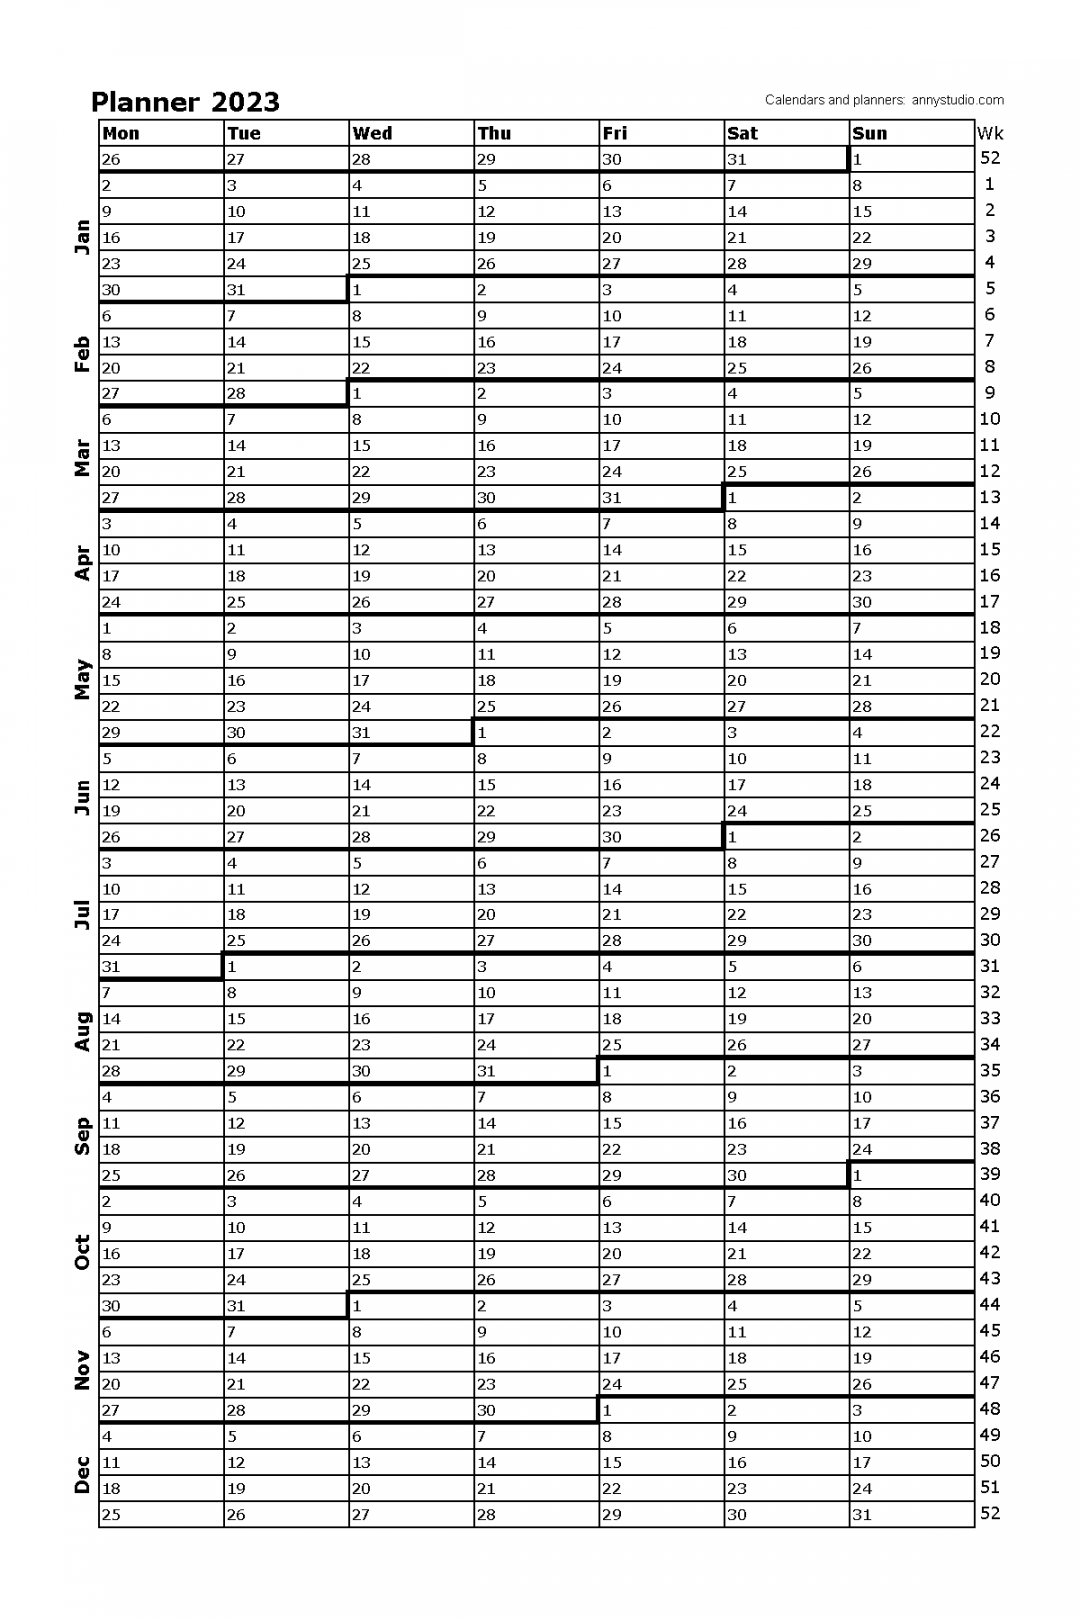 Free printable calendars and planners for  and past years